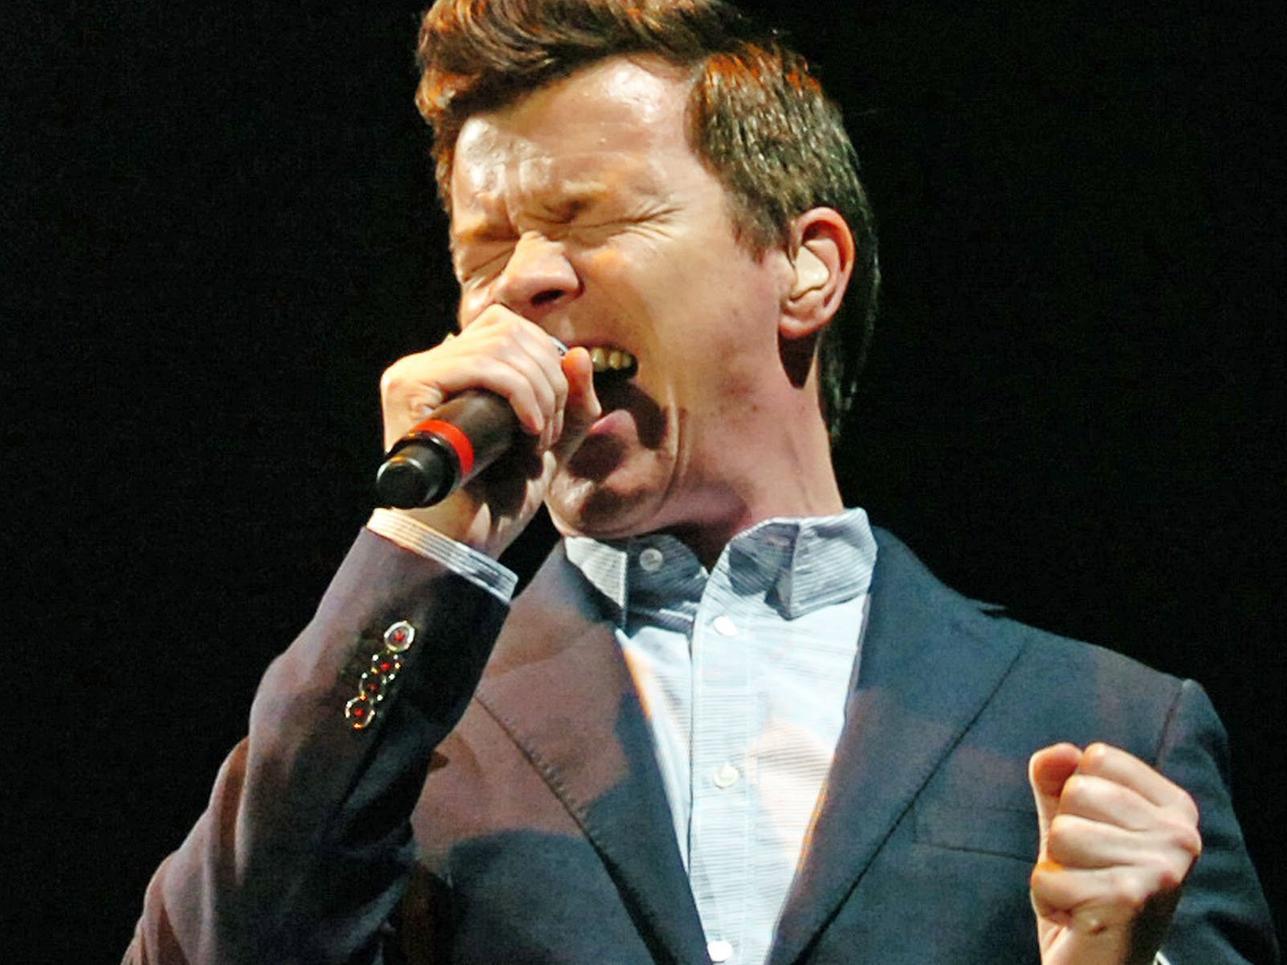 3 April: Rick Astley has sold over 100,000 tickets to his UK headline shows since releasing his chart-topping album 50in 2016. His sets are often peppered with inspired covers like Calvin Harris and Rag n Bone Mans Giant